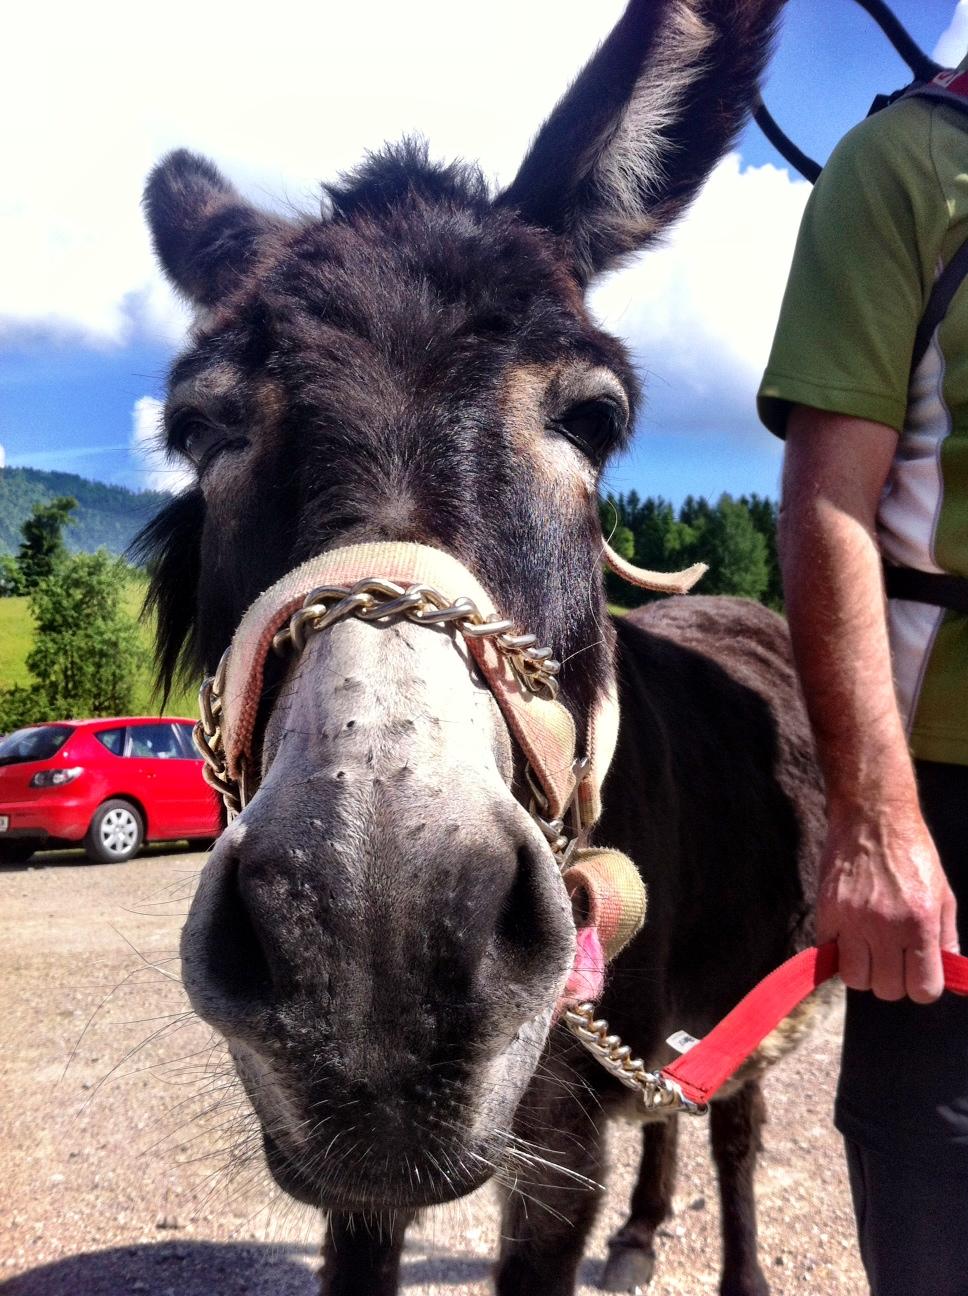 Maxi, our fearless leader and donkey for our hike in Mostviertel